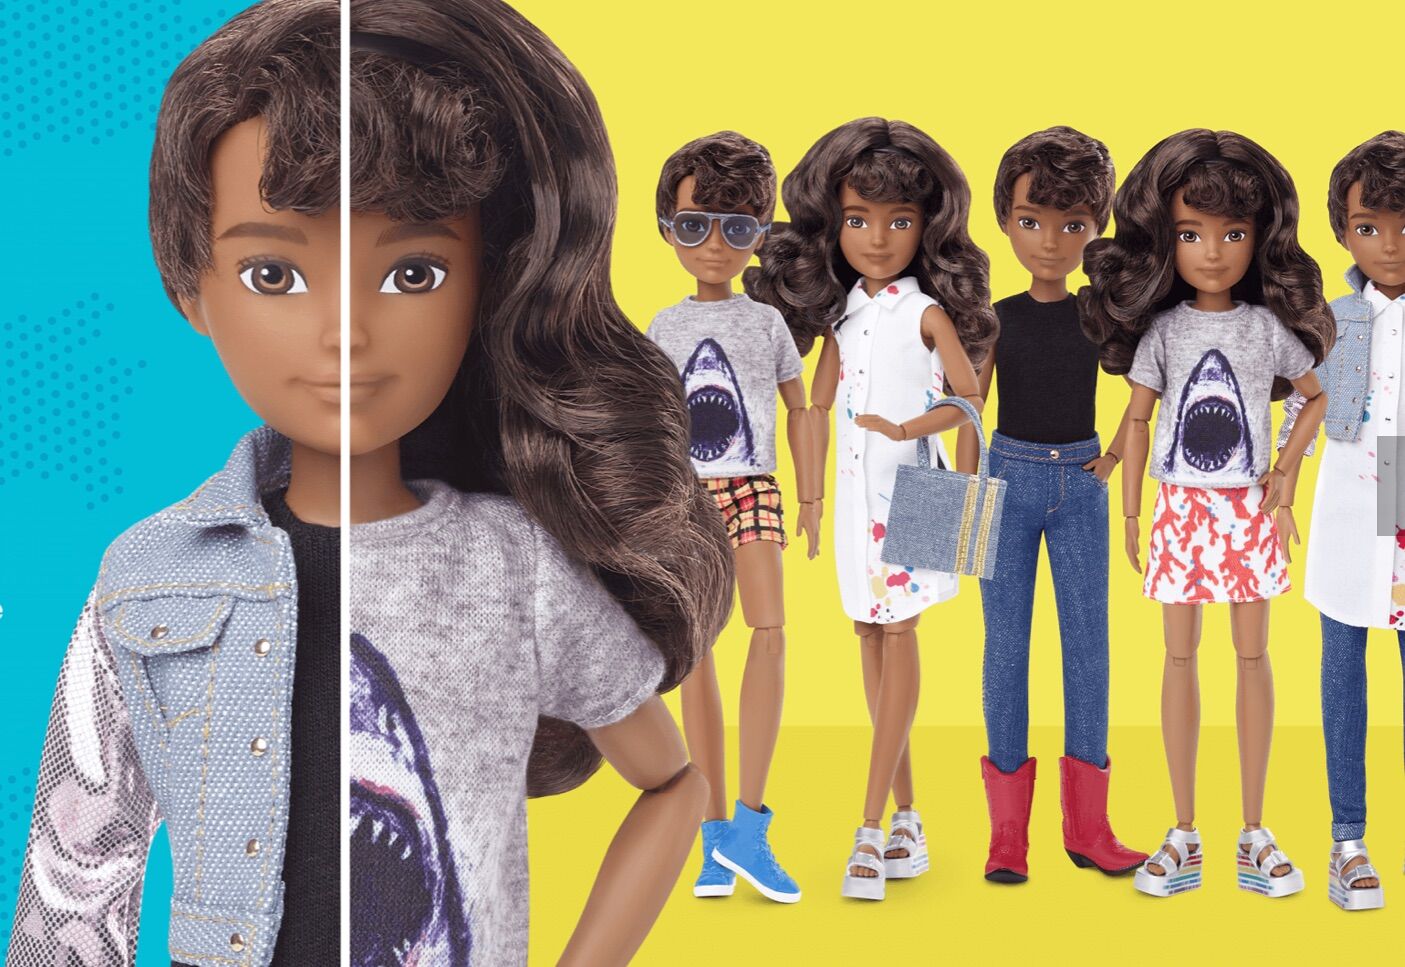 Mattel is launching "Creatable World," a new line of gender neutral dolls